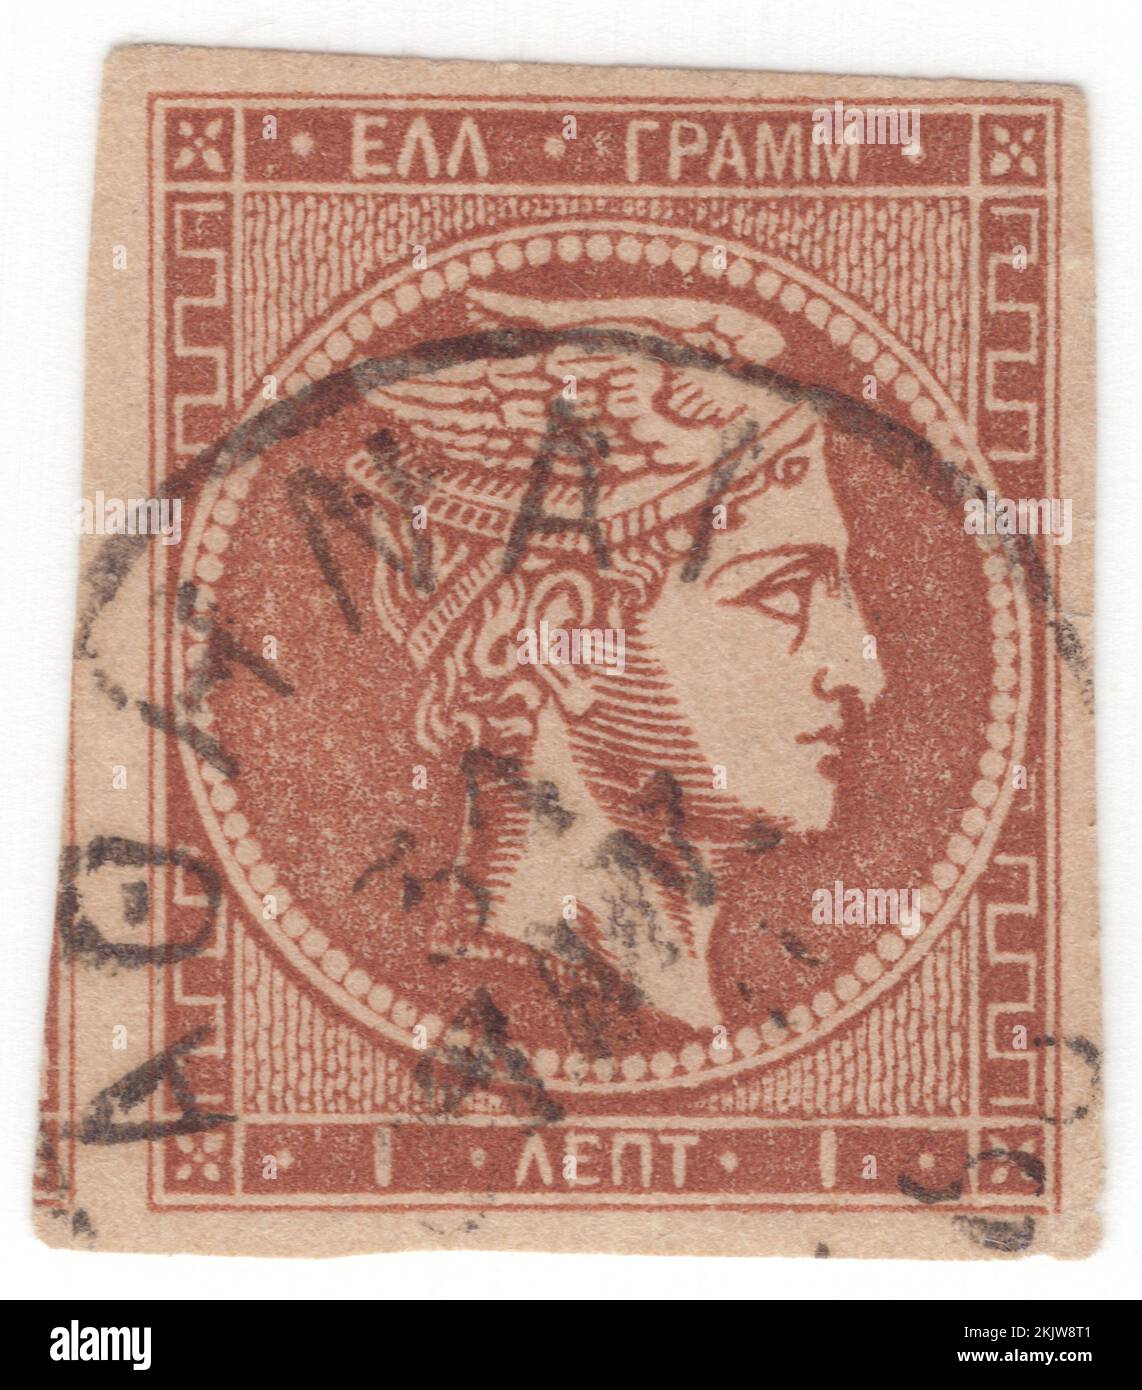 GREECE - 1862: An 1 lepta chocolate on brownish postage stamp depicting Hermes (Mercury), Olympian deity in ancient Greek religion and mythology. Hermes is considered the herald of the gods. He is also considered the protector of human heralds, travellers, thieves, merchants, and orators. He is able to move quickly and freely between the worlds of the mortal and the divine, aided by his winged sandals. Hermes plays the role of the psychopomp or 'soul guide'—a conductor of souls into the afterlife. In myth, Hermes functions as the emissary and messenger of the gods Stock Photo